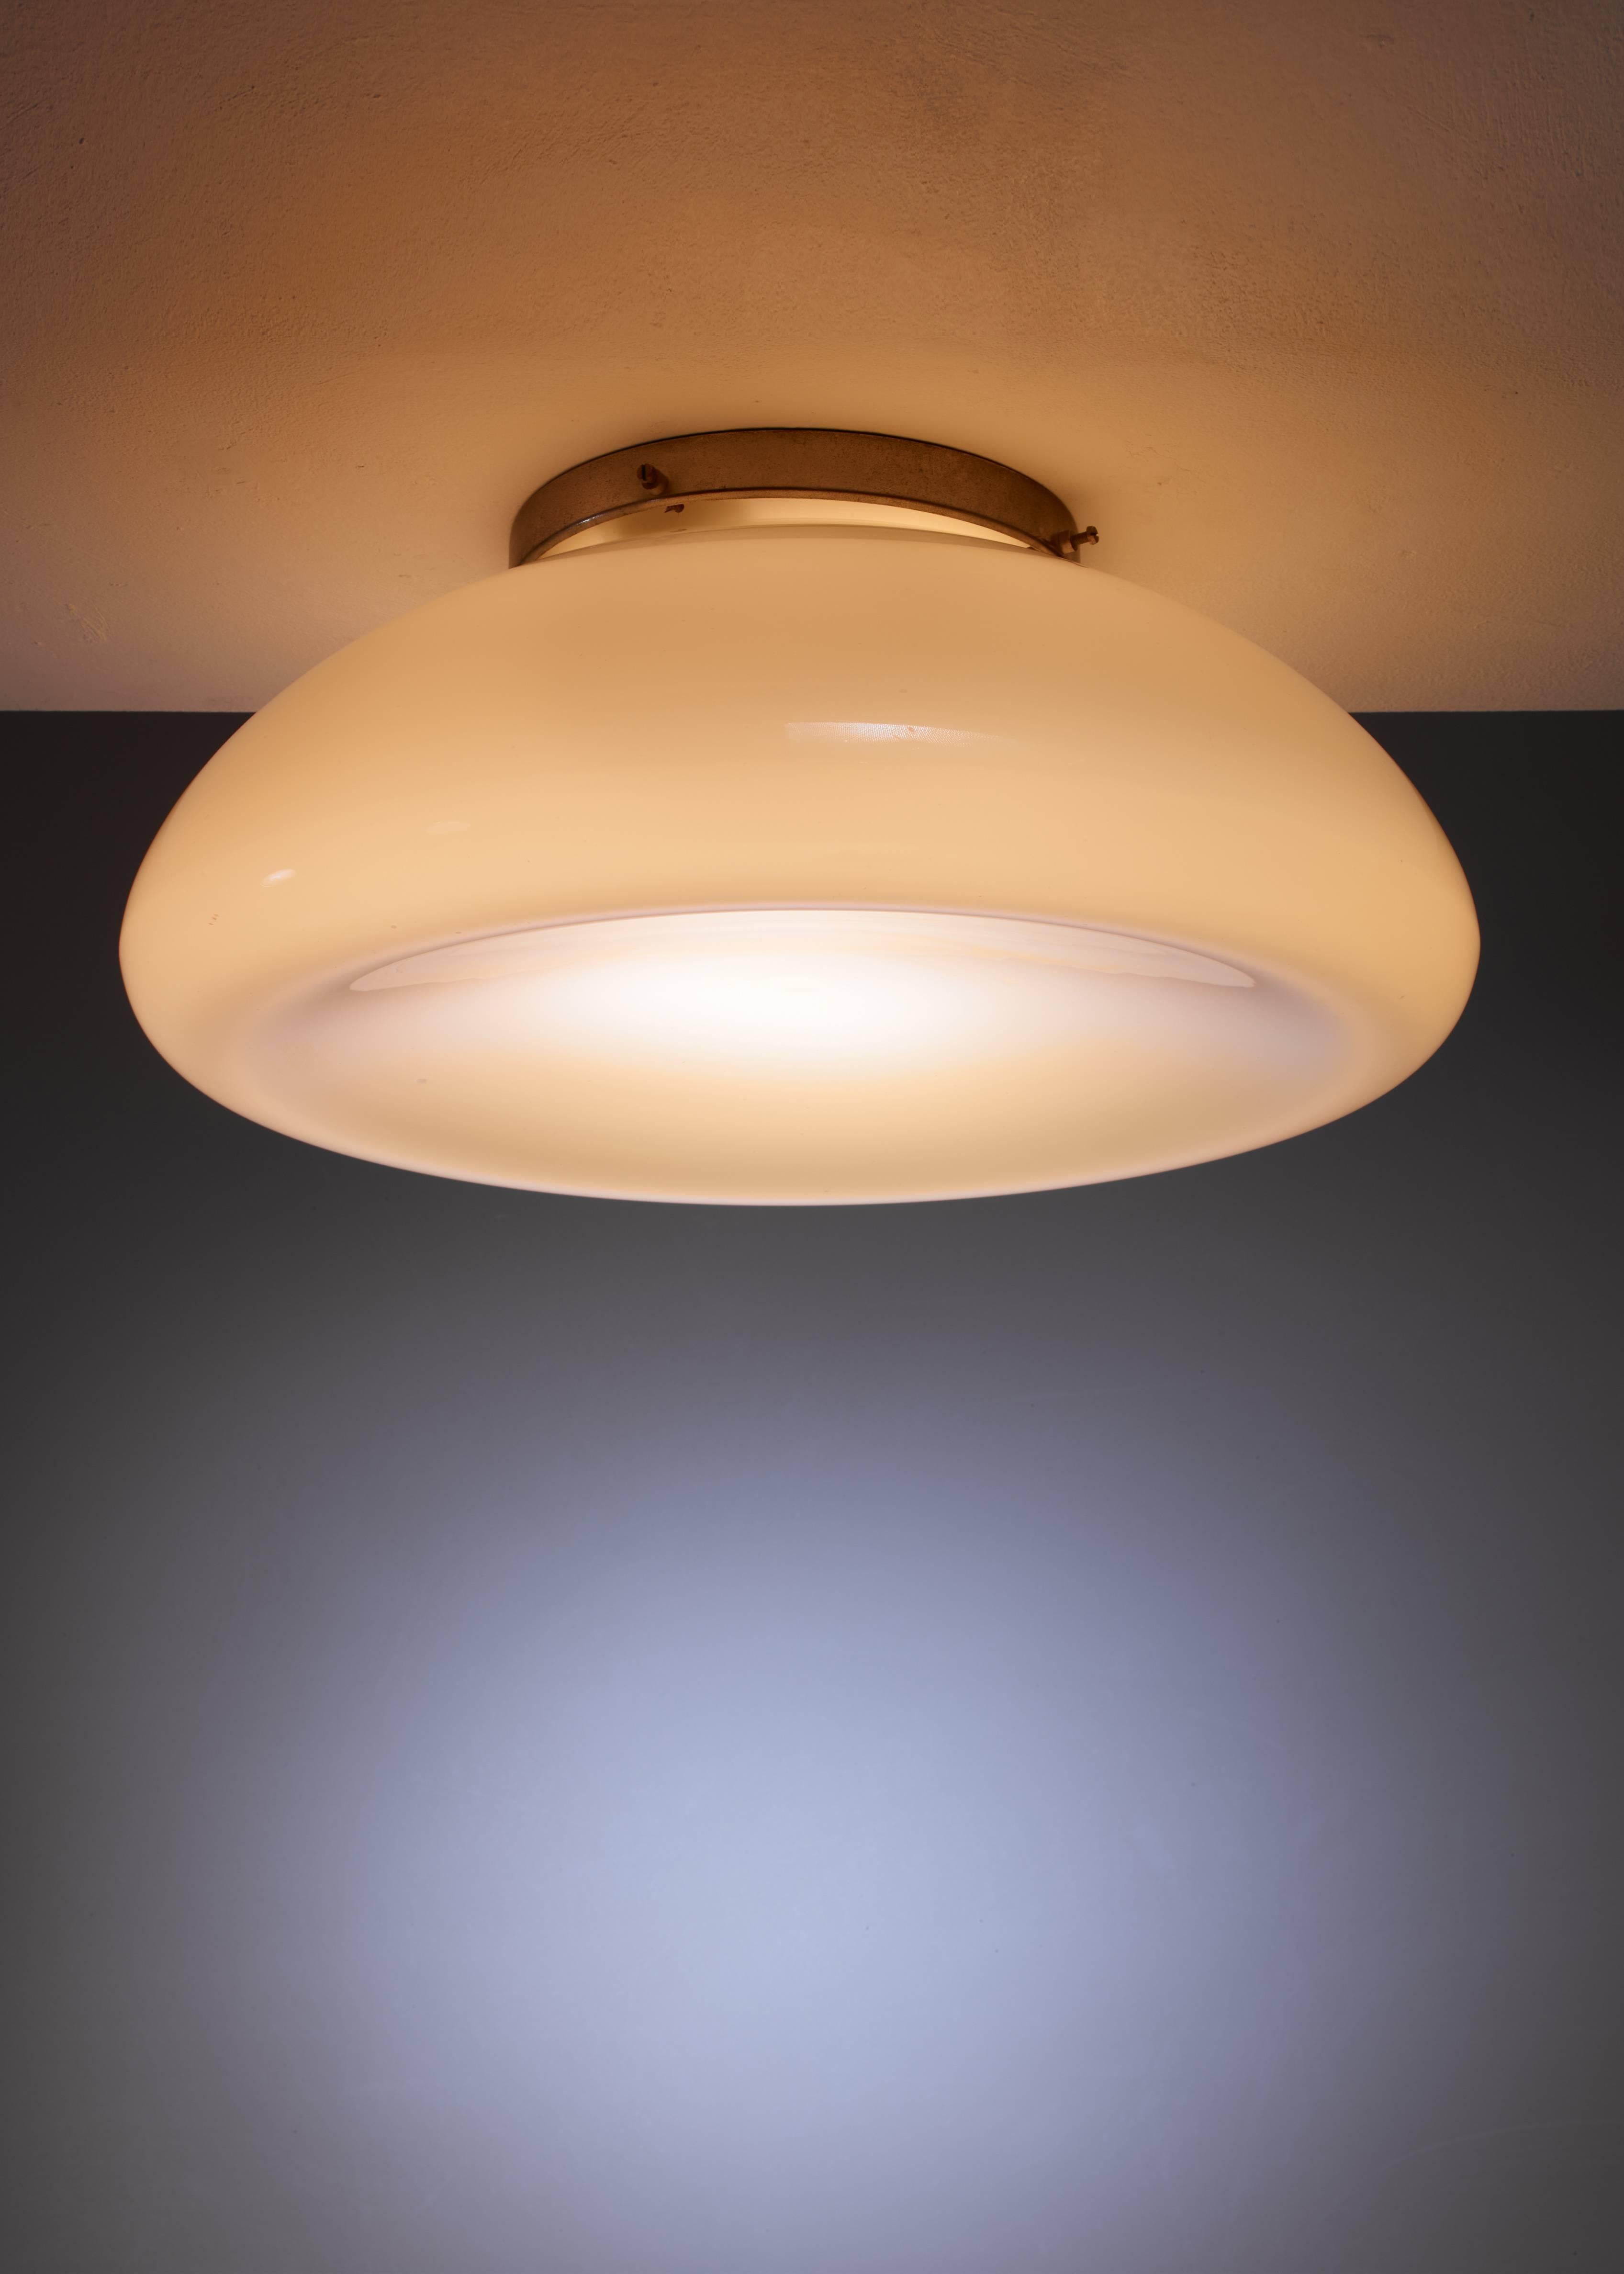 A large and rare Idman flush mount ceiling lamp with a concave round glass shade and three-light bulbs inside. The shade is made of two layers of glass, white inside and yellow on the outside, providing a stunning light effect.

Marked by Idman and